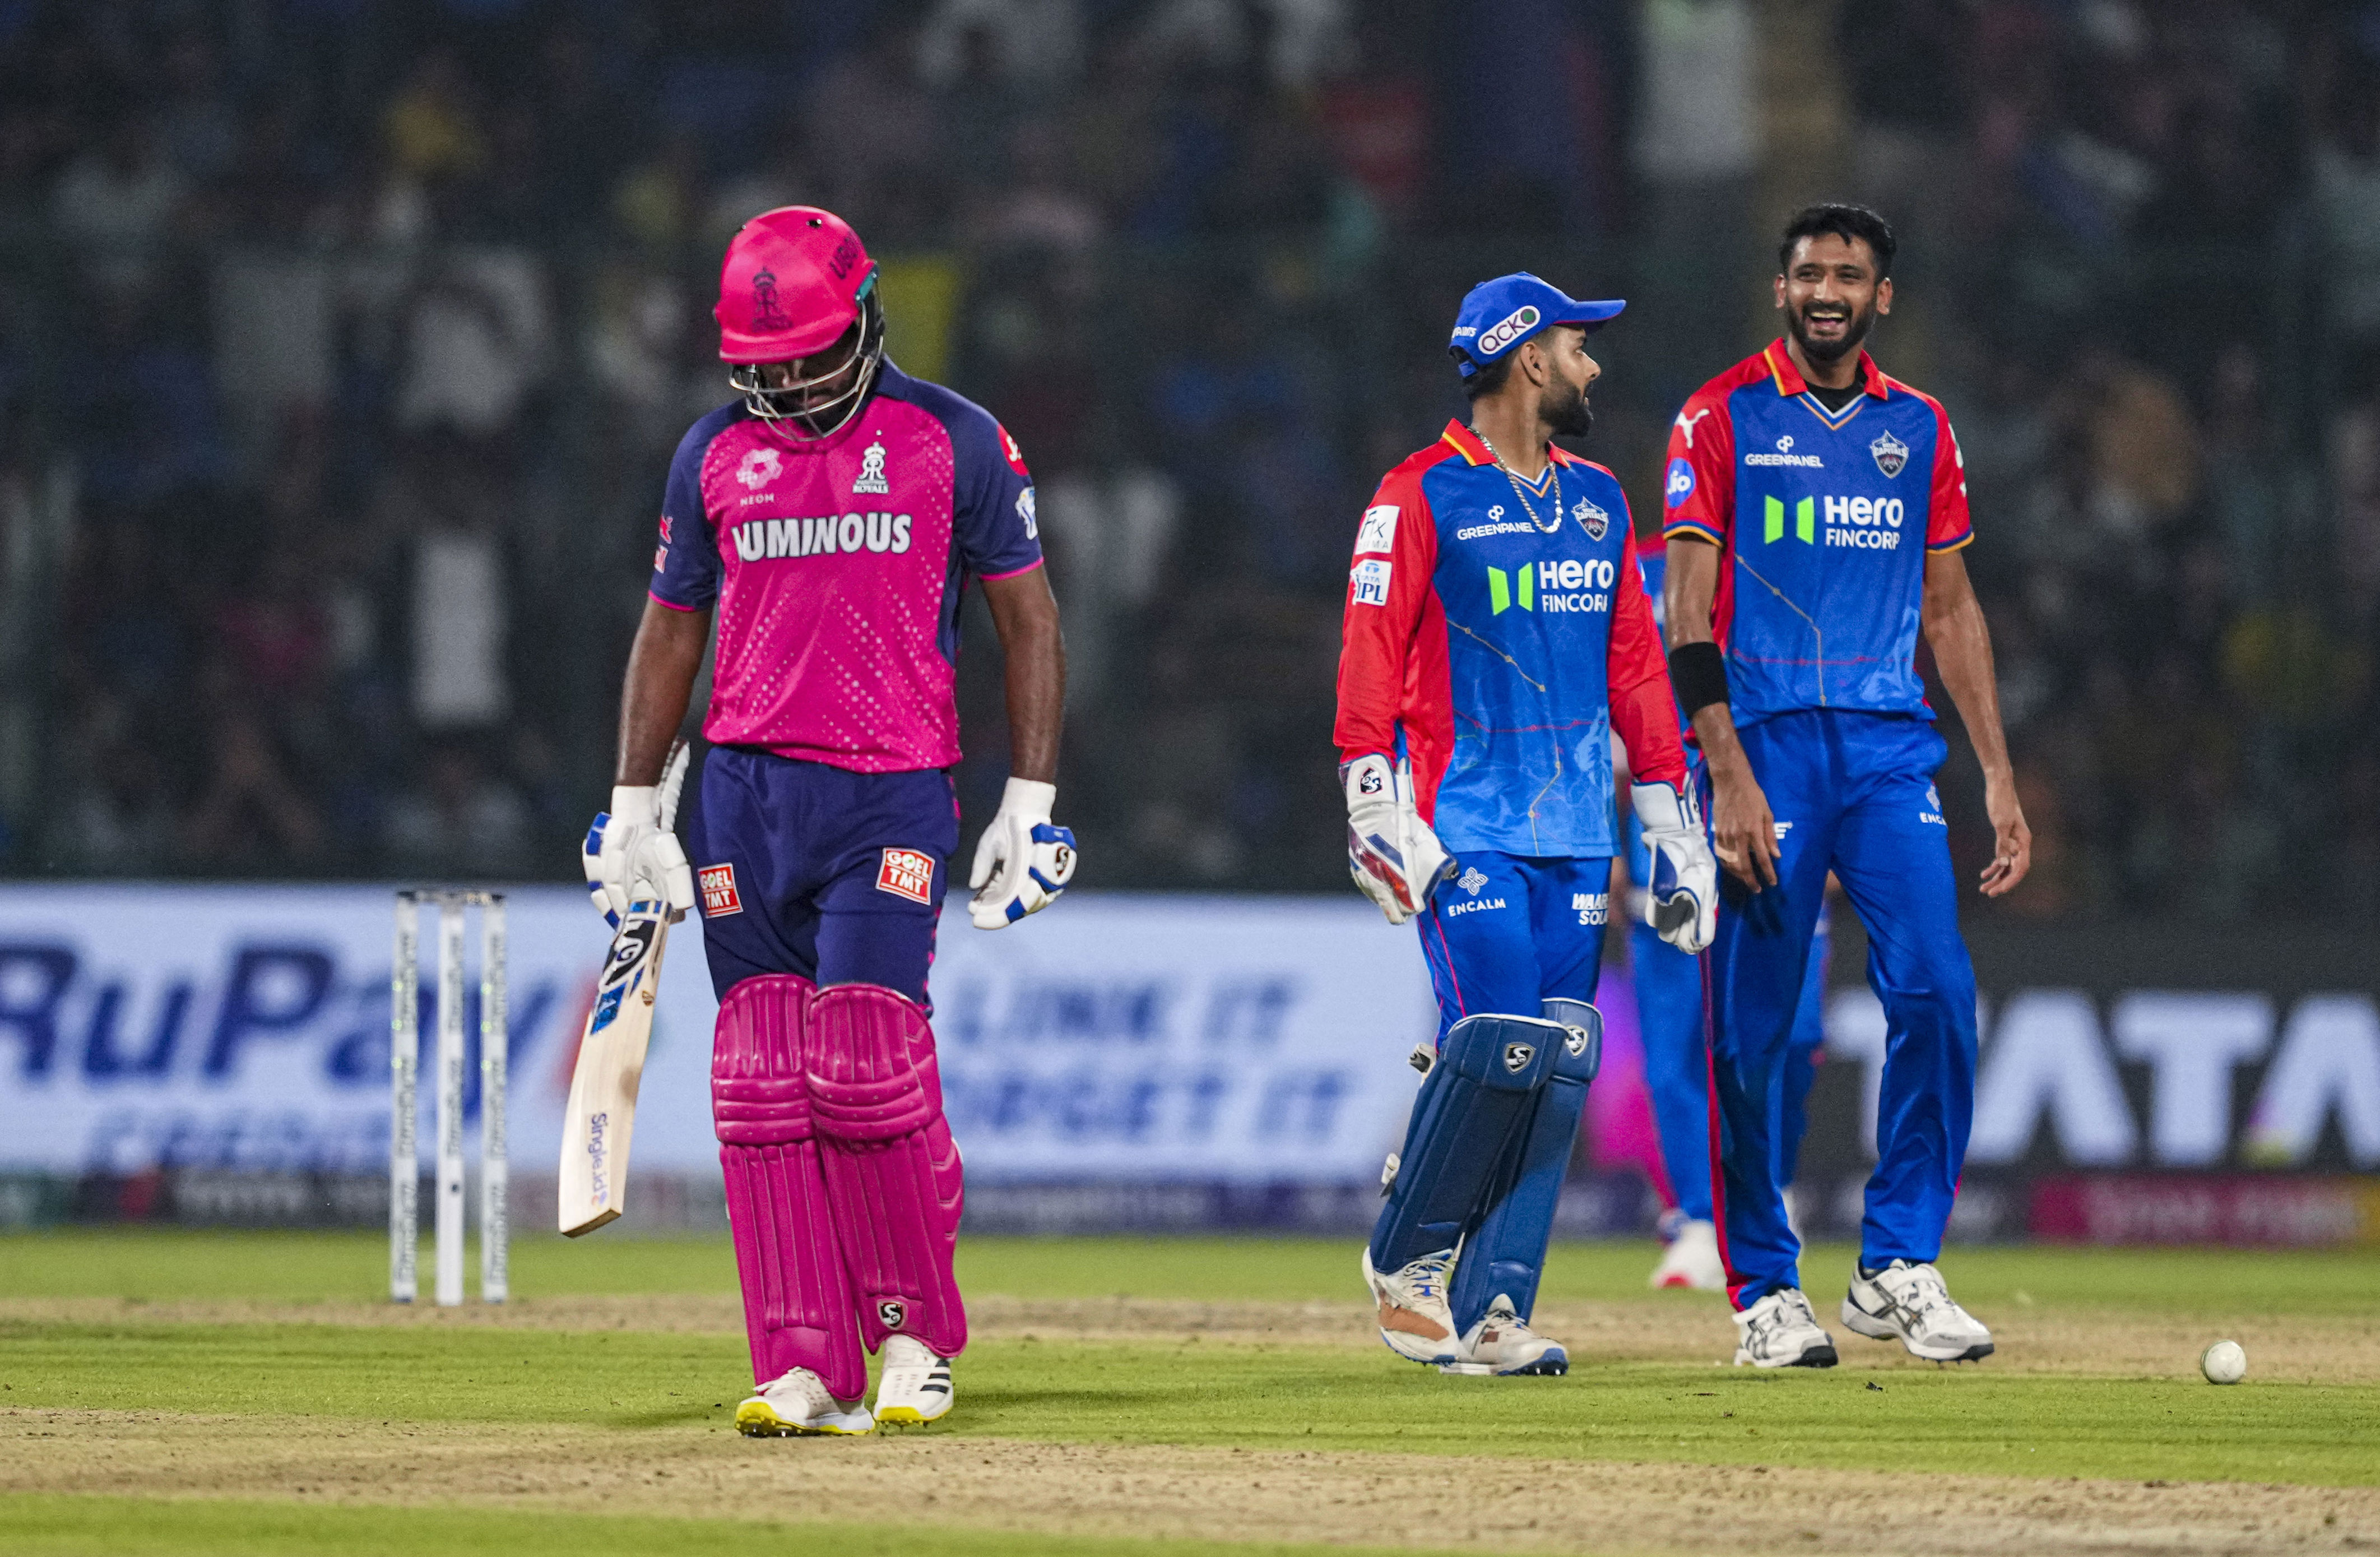 rr captain samson fined 30 per cent match fees for breaching ipl code of conduct